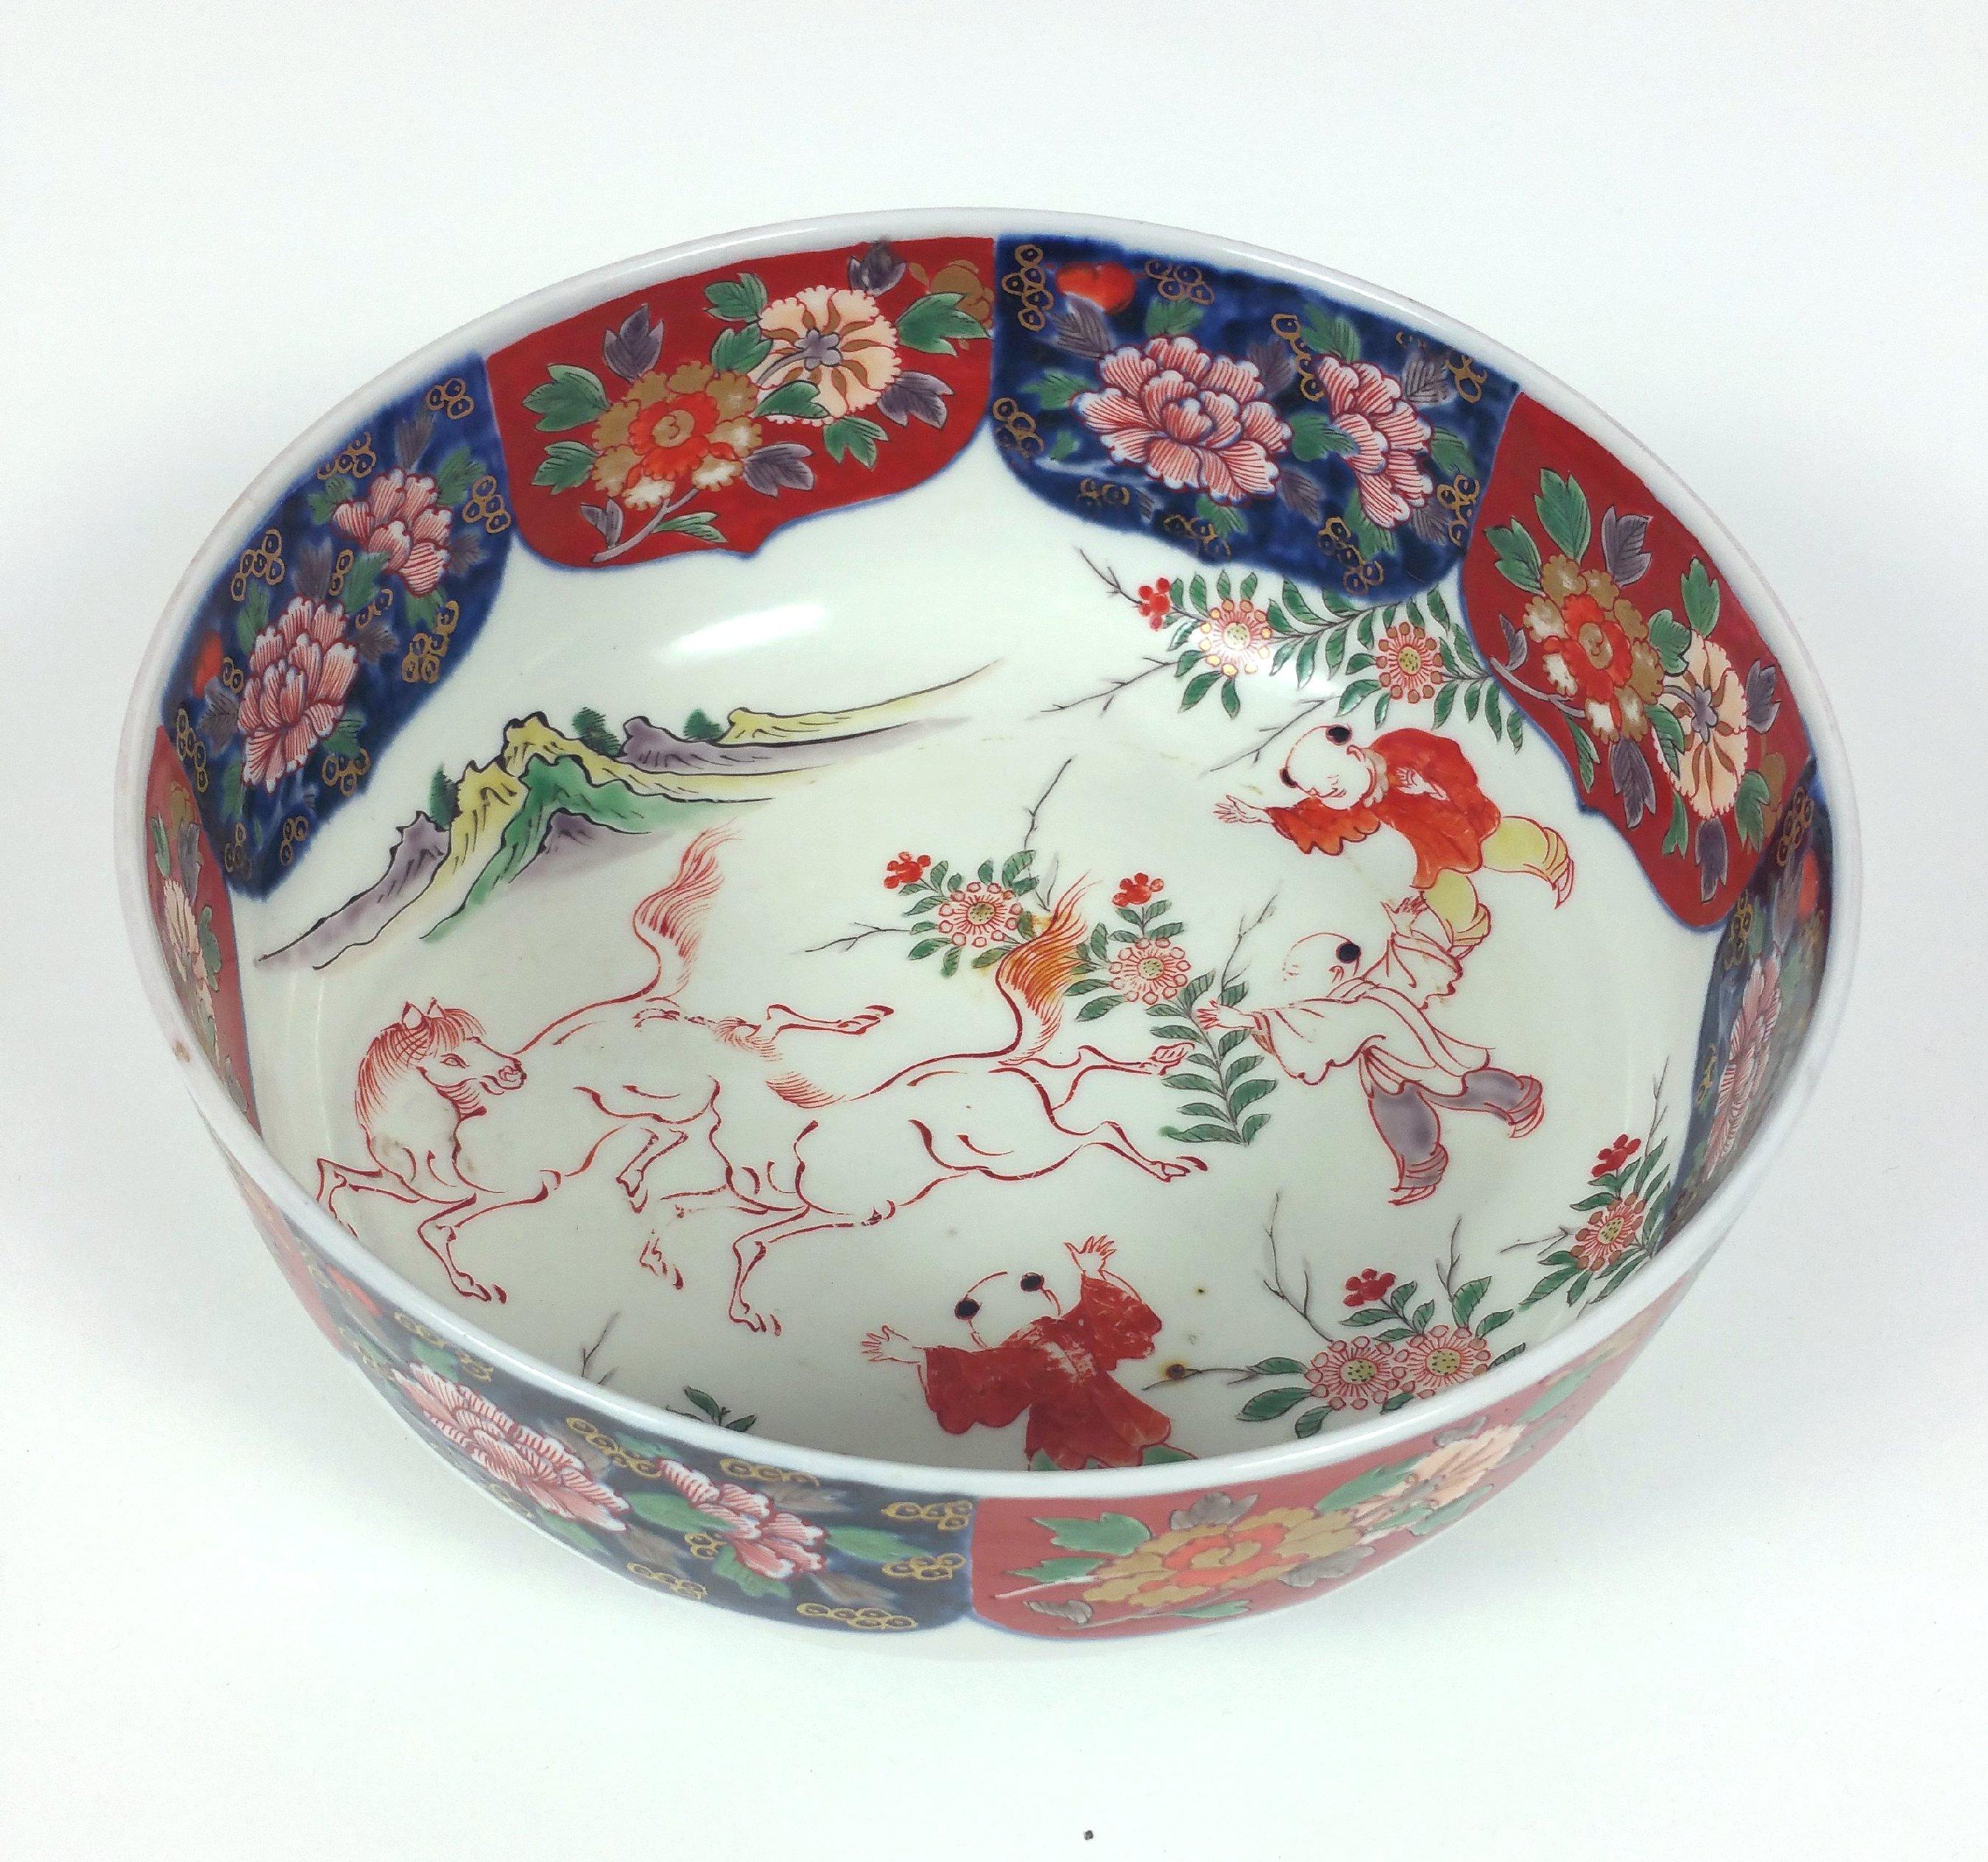 This very attractive 19th century Japanese pottery bowl painted with wild horses and boys in a mountainous landscape within a frieze painted with flowers on the inside. There are four character marks on the base with additional floral decoration on